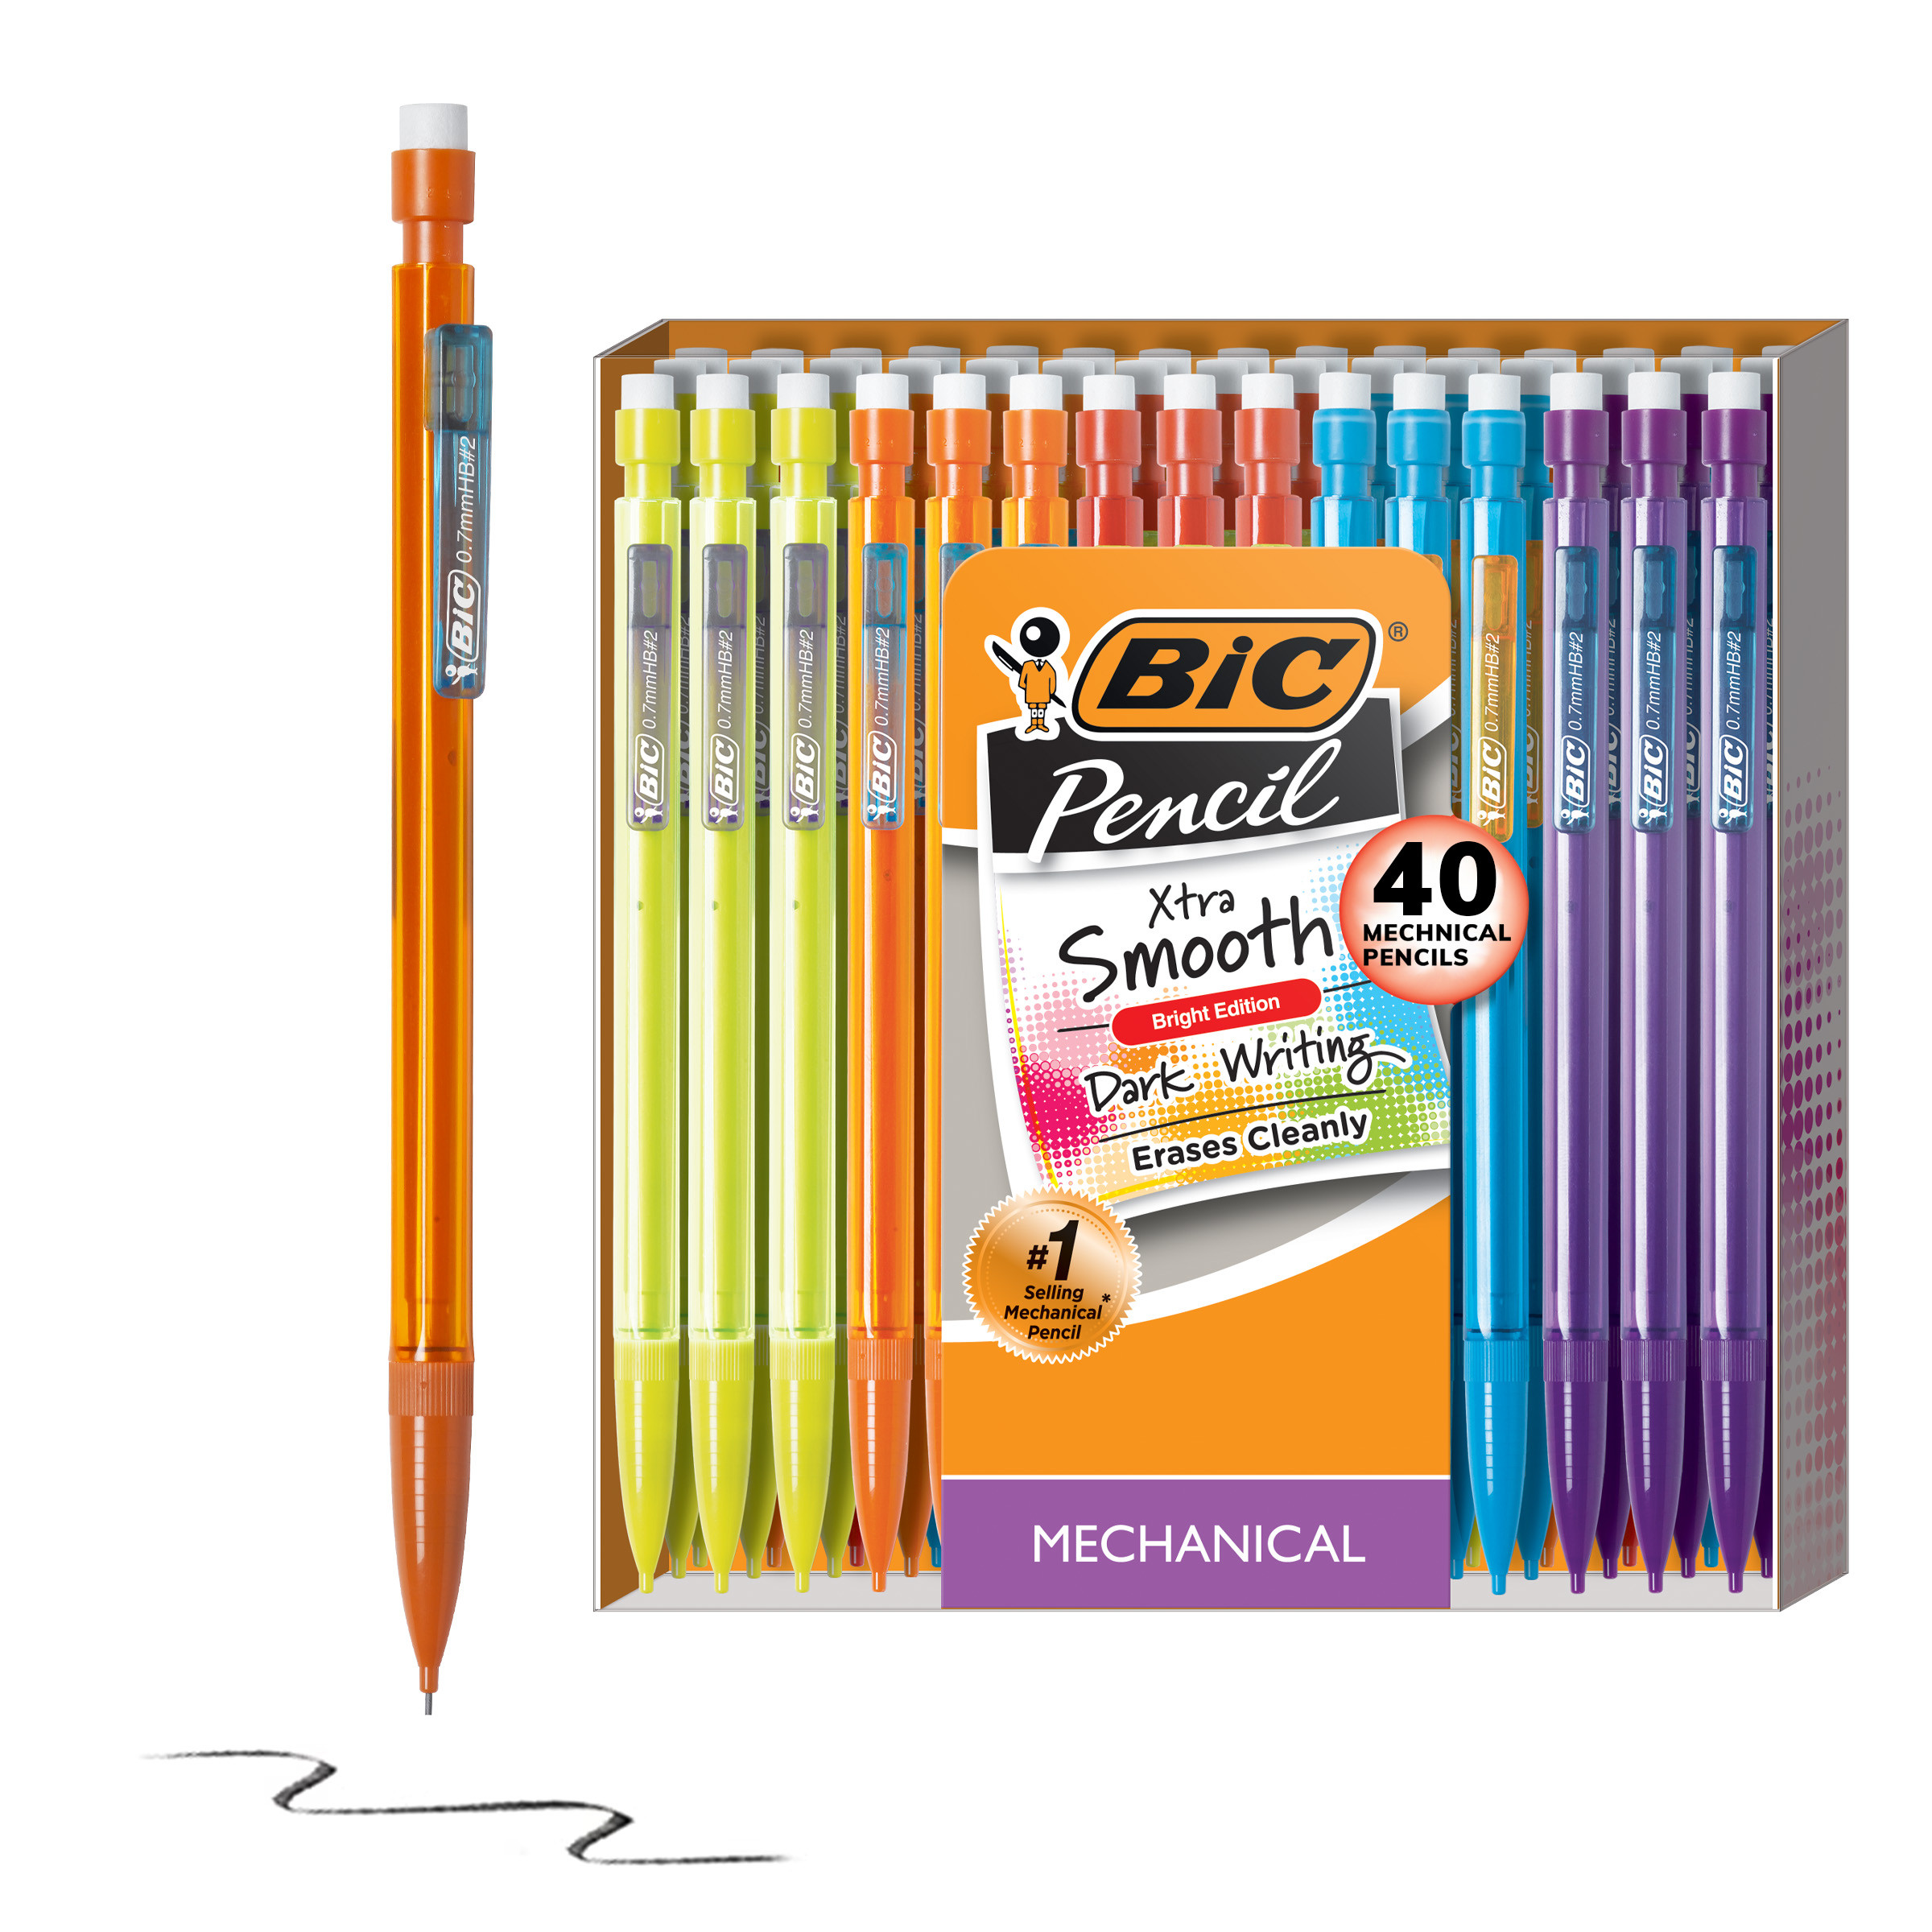 BIC Xtra-Smooth Mechanical Pencils with Erasers, Bright Edition Medium Point (0.7mm), Pack of 40 - image 1 of 9